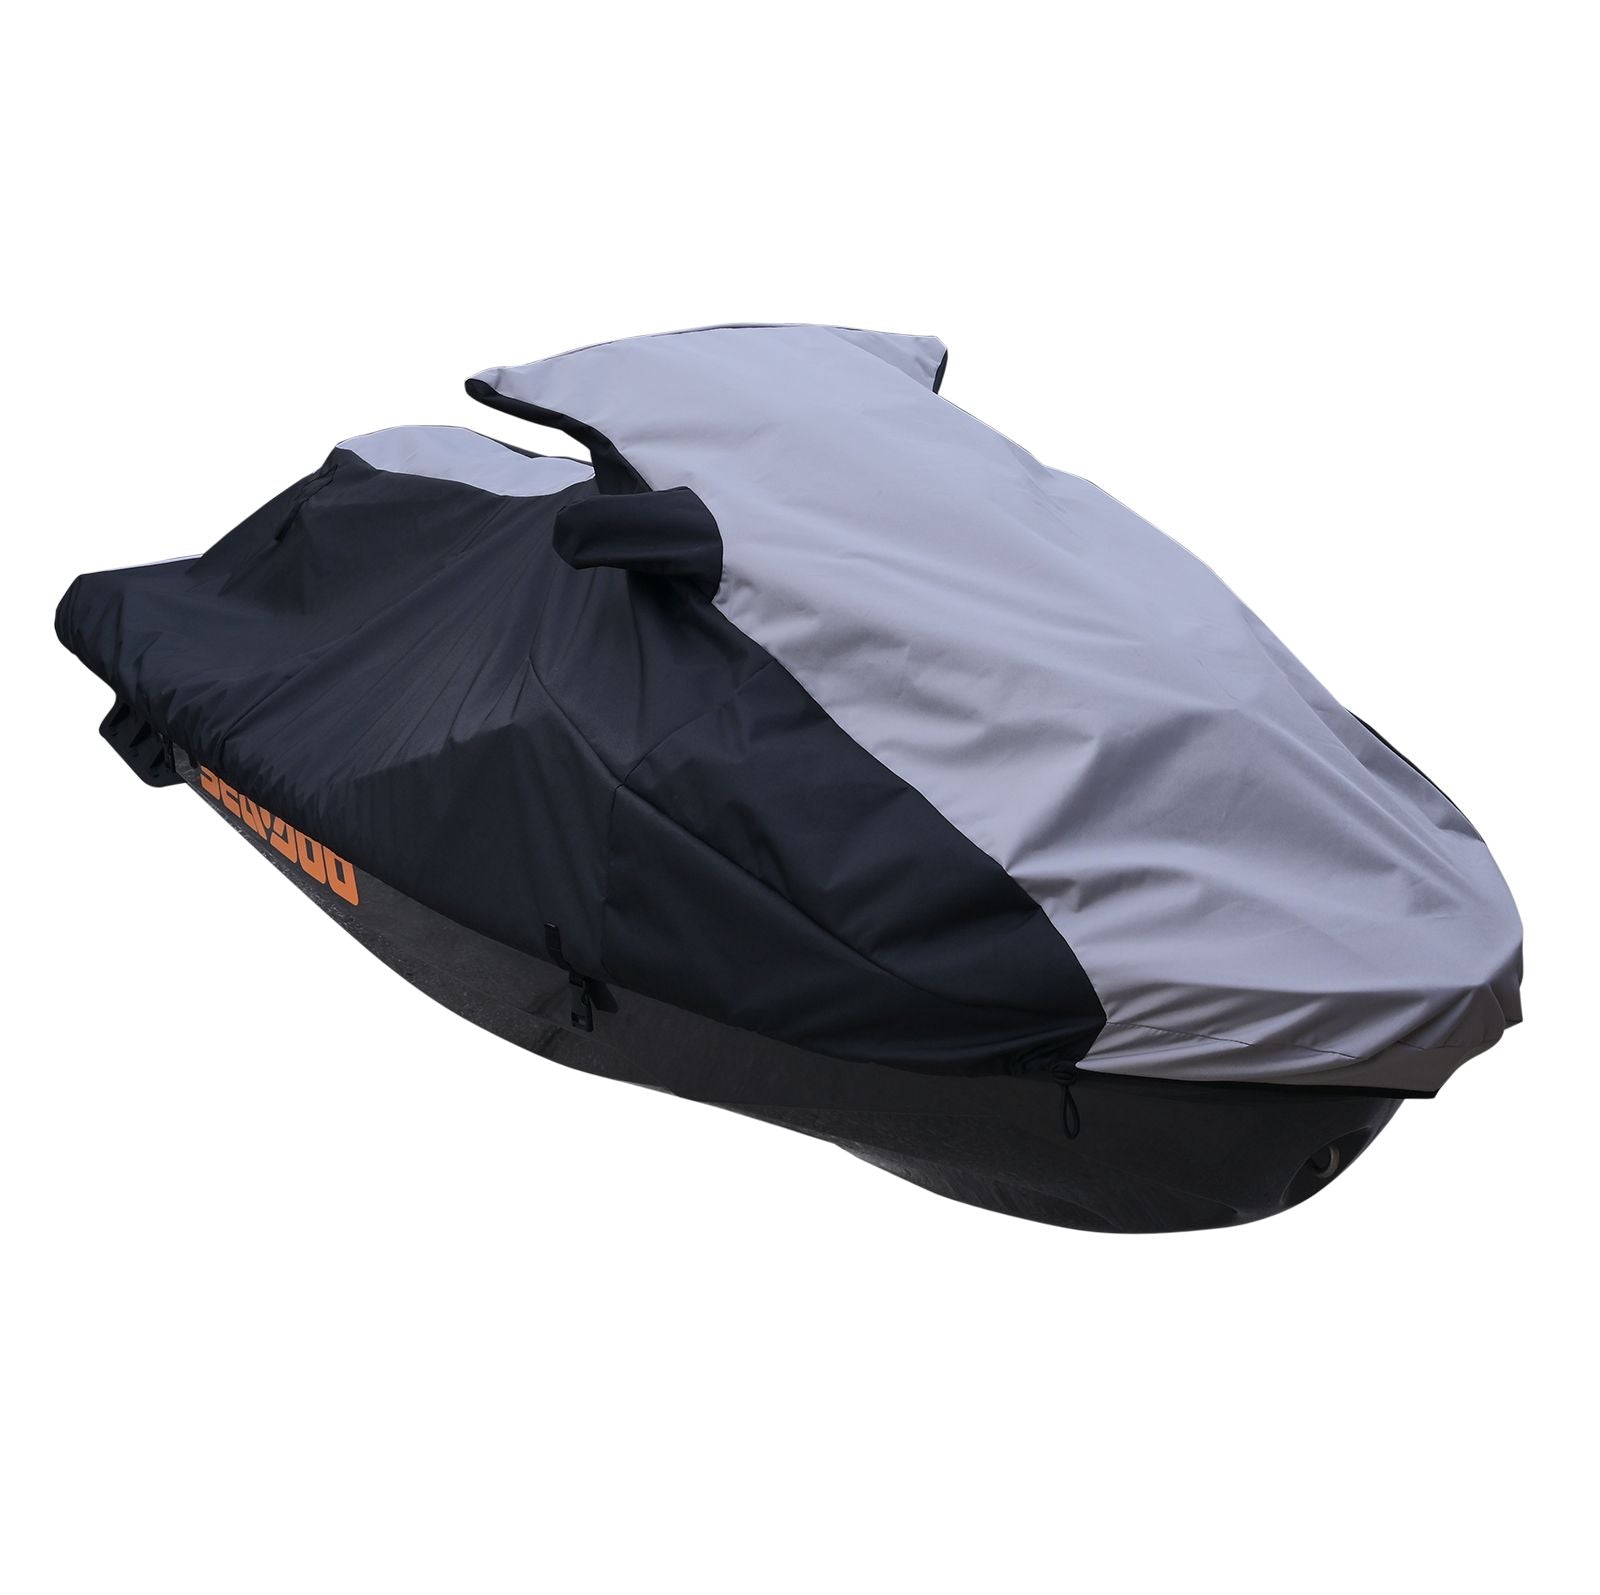 Trailerable Storage cover with vents for Yamaha 1995-1998 Wave Venture 700/1996-1997 Wave Venture 1100/1997 Wave Venture 76